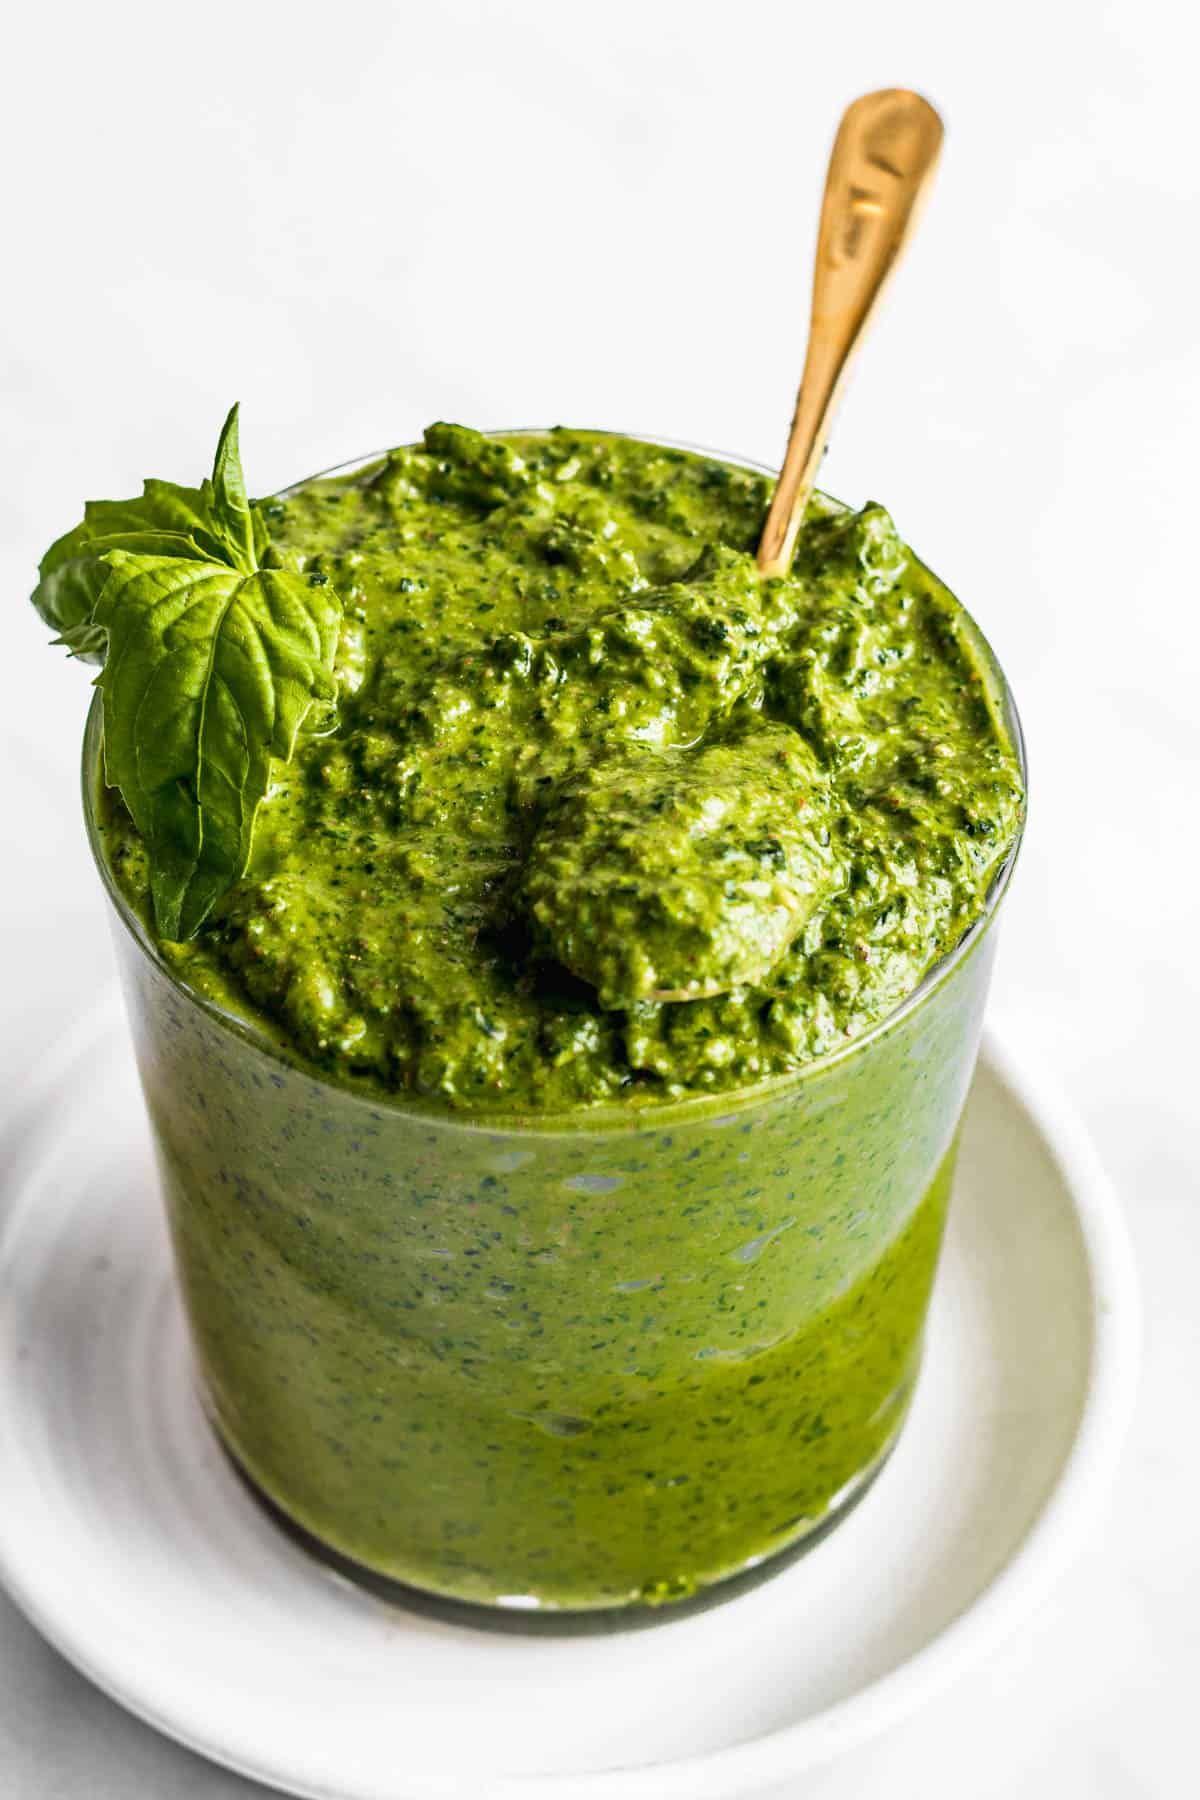 Vegan pesto in glass jar with gold spoon garnished with fresh basil.